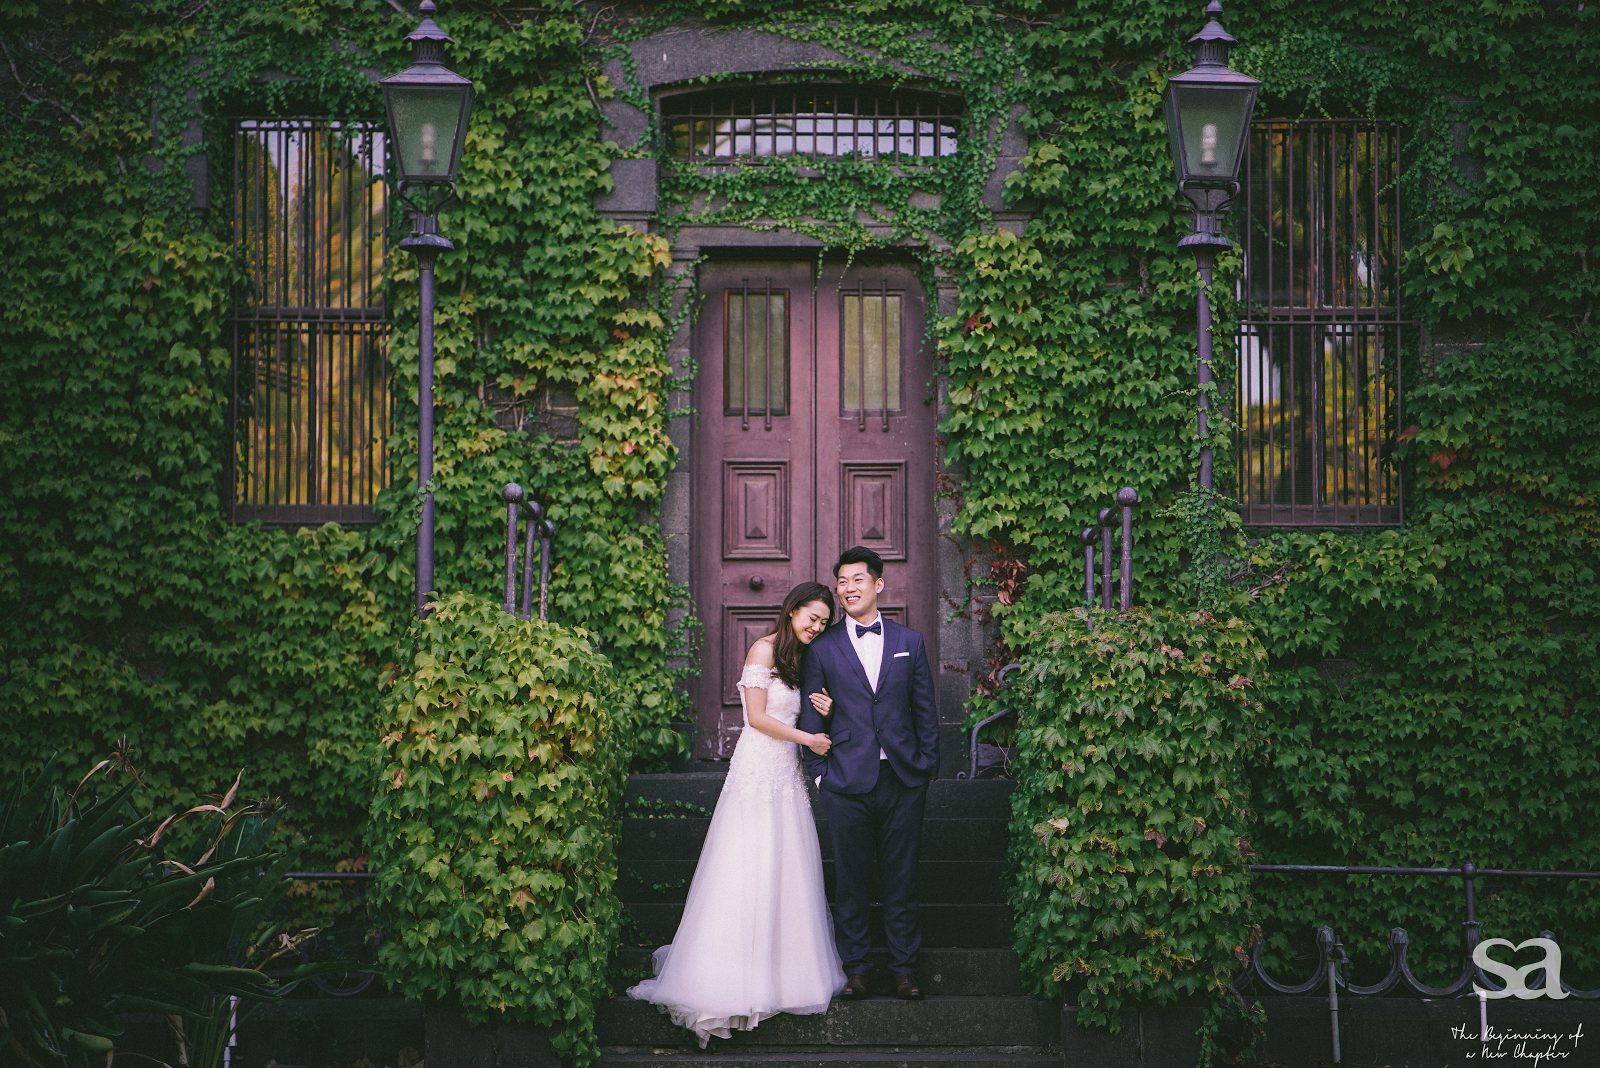 Malaysian wedding couple poses in front of a green covered wall. Photo by SA Photography